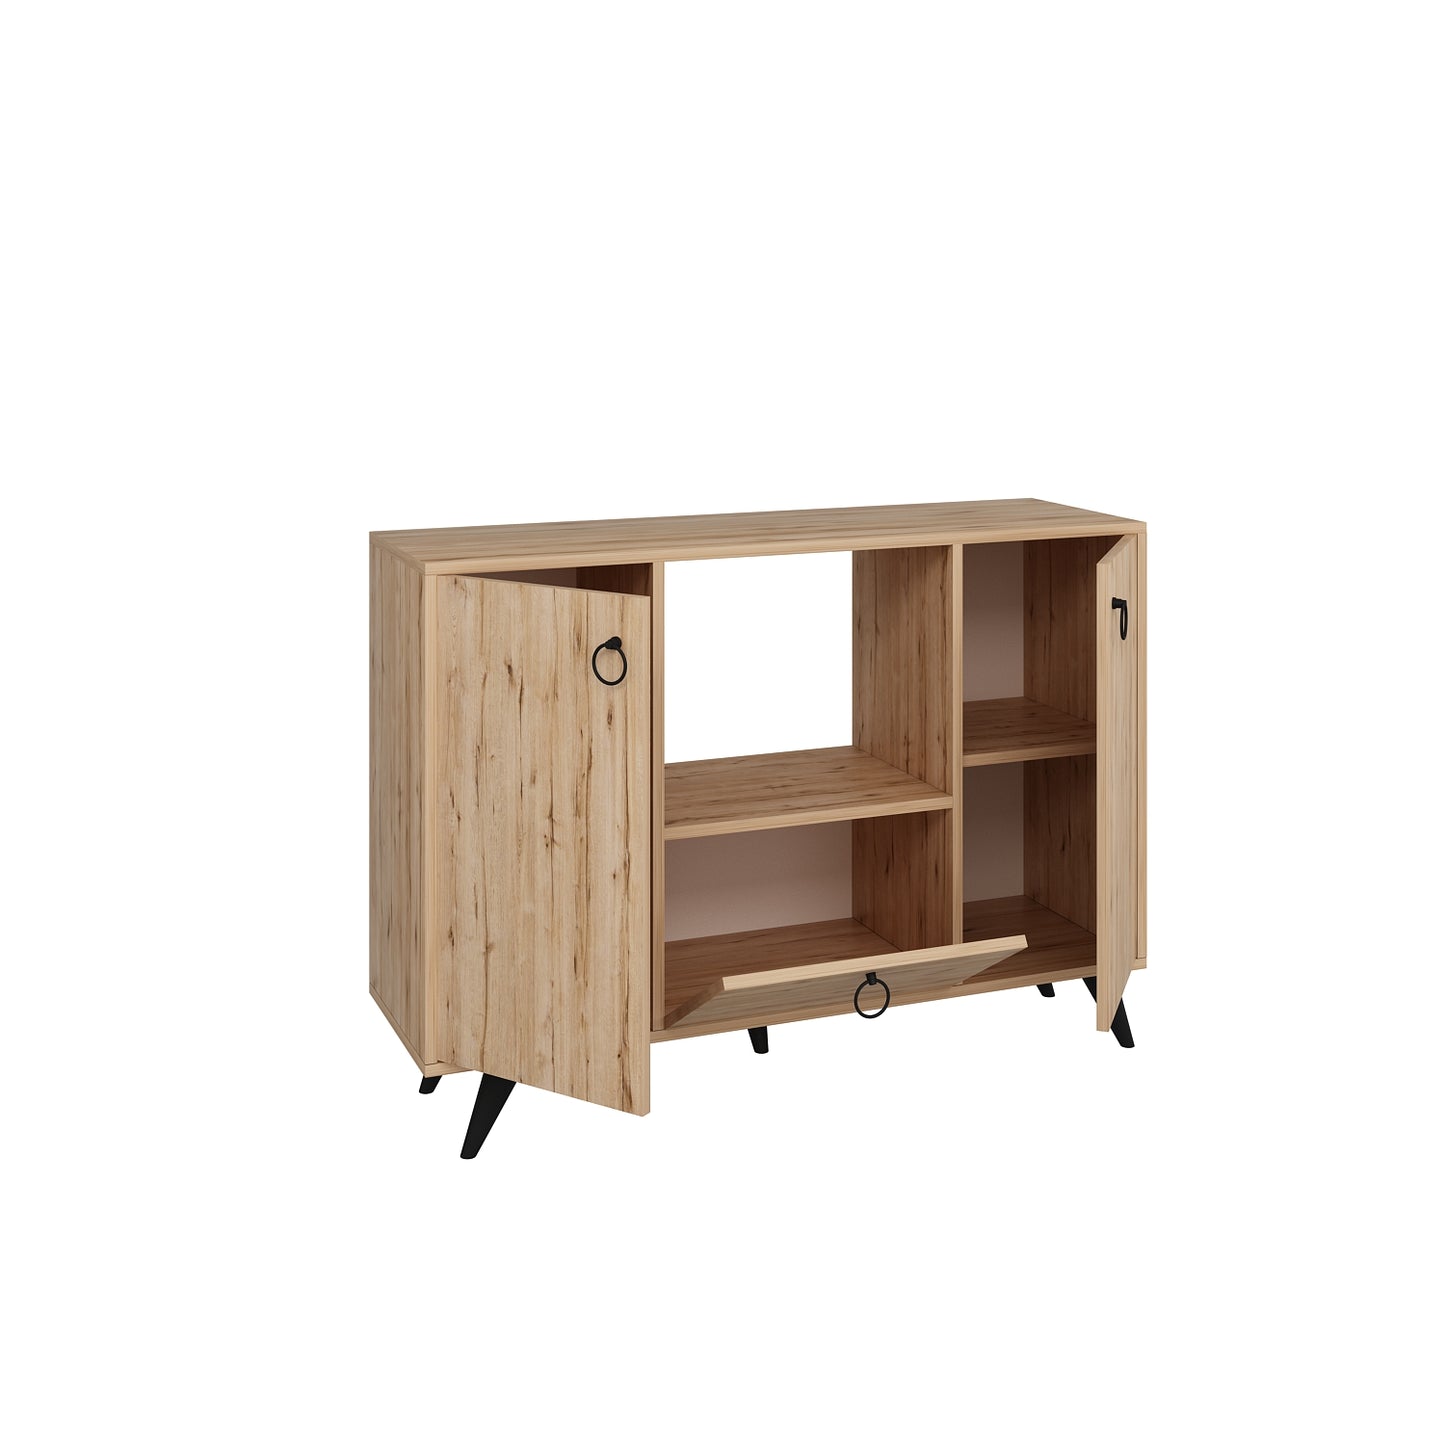 Silvestro Sideboard with Cabinets and Shelf